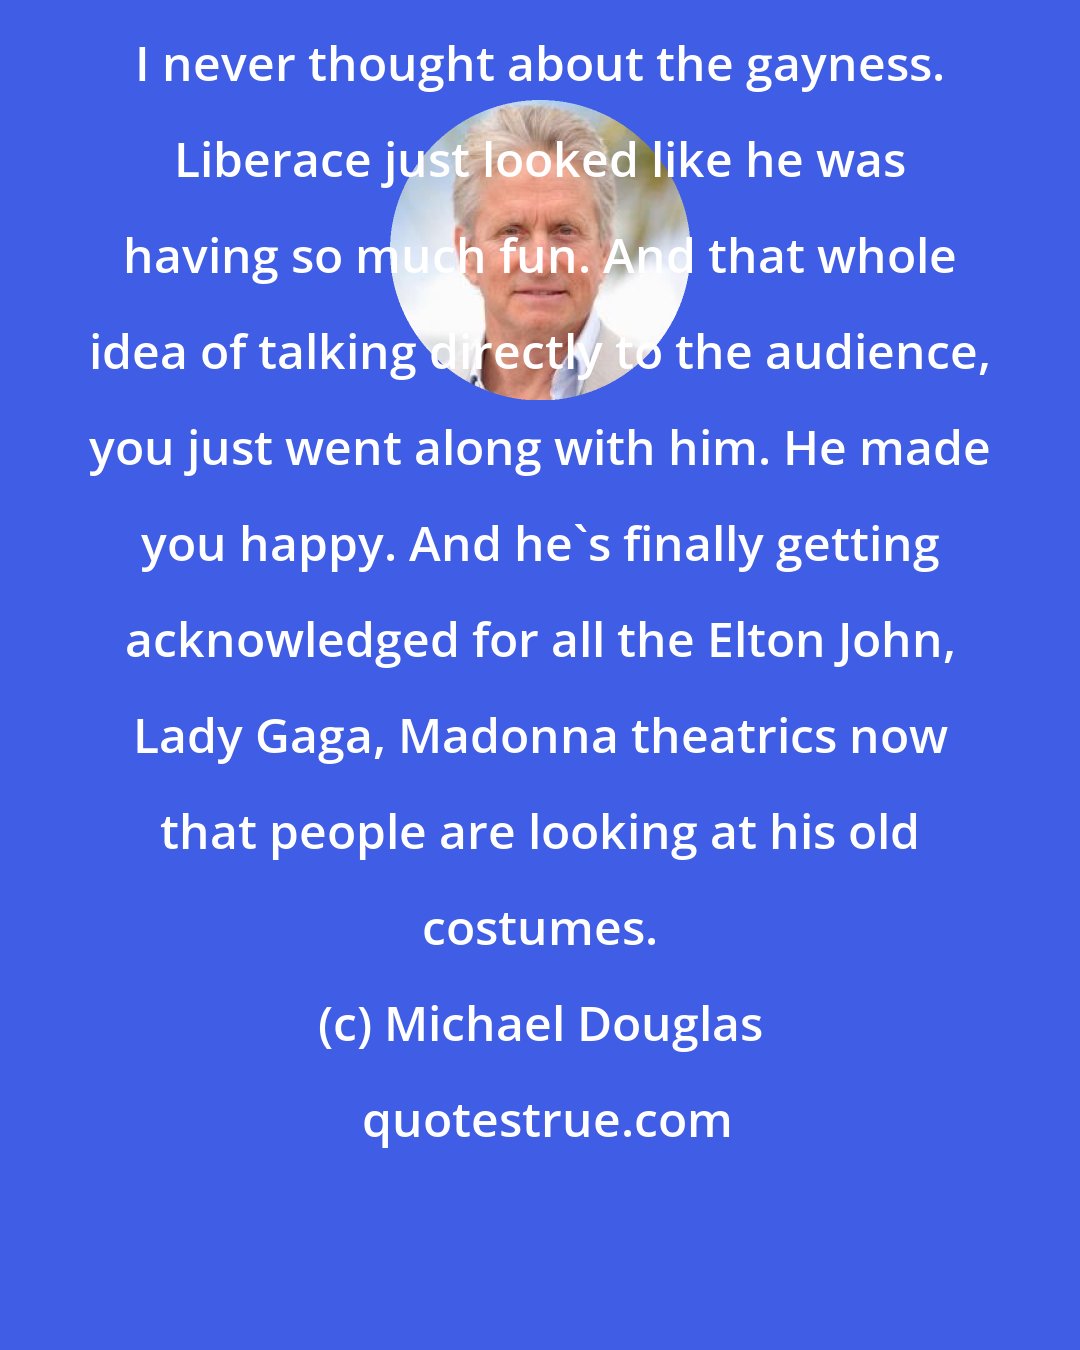 Michael Douglas: I never thought about the gayness. Liberace just looked like he was having so much fun. And that whole idea of talking directly to the audience, you just went along with him. He made you happy. And he's finally getting acknowledged for all the Elton John, Lady Gaga, Madonna theatrics now that people are looking at his old costumes.